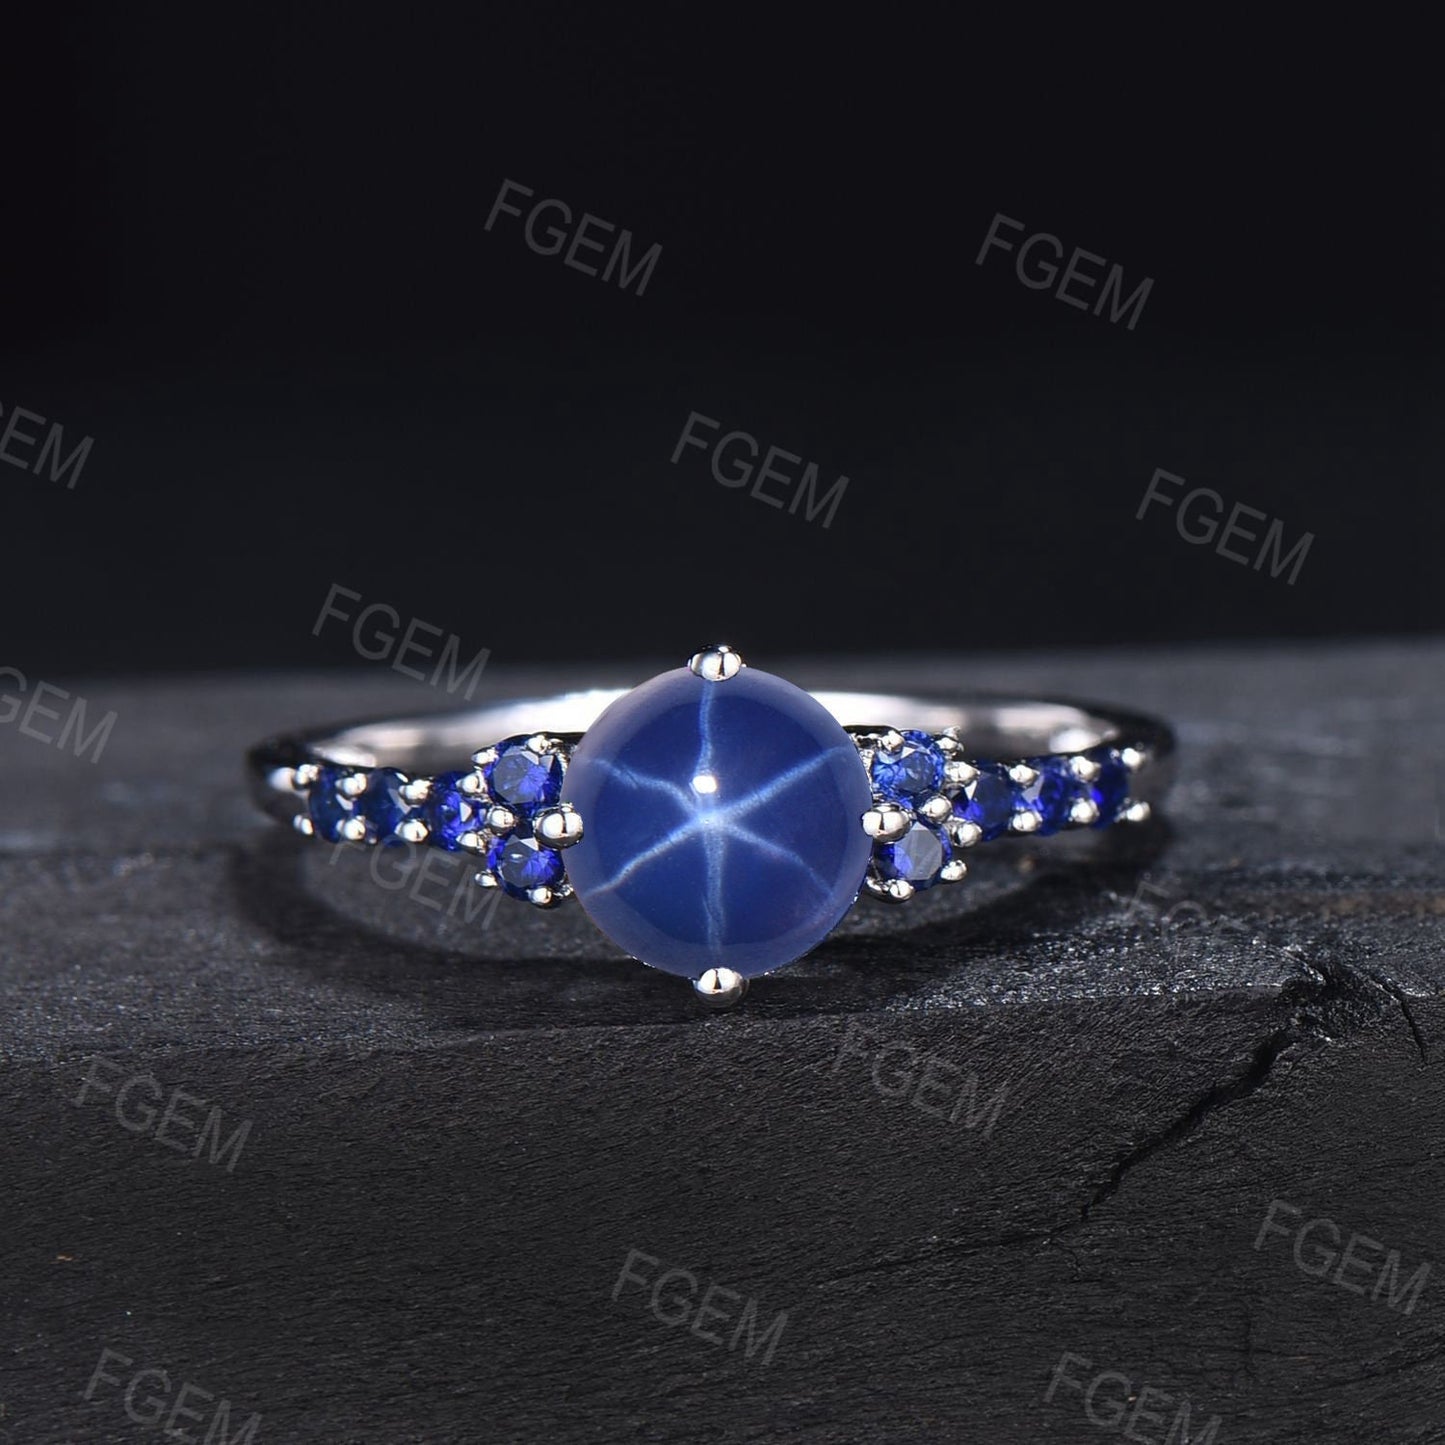 Sterling Silver Blue Star Engagement Ring Vintage 7mm Round Star Sapphire Wedding Ring September Birthstone Cabochon Cluster Promise Rings